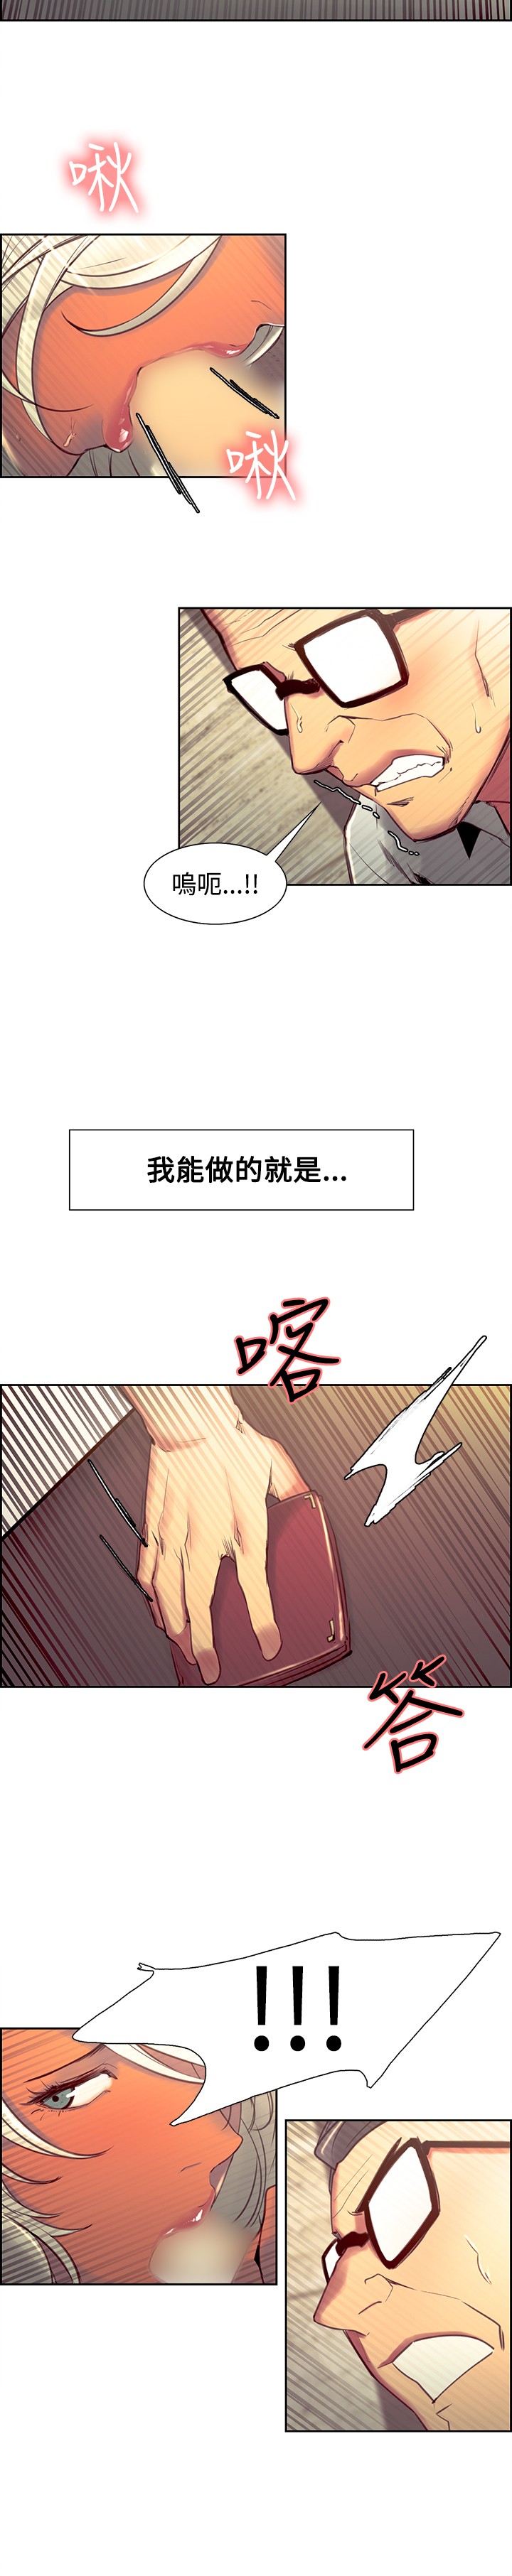 [Serious] Domesticate the Housekeeper 调教家政妇 Ch.29~41 [Chinese]中文 page 50 full